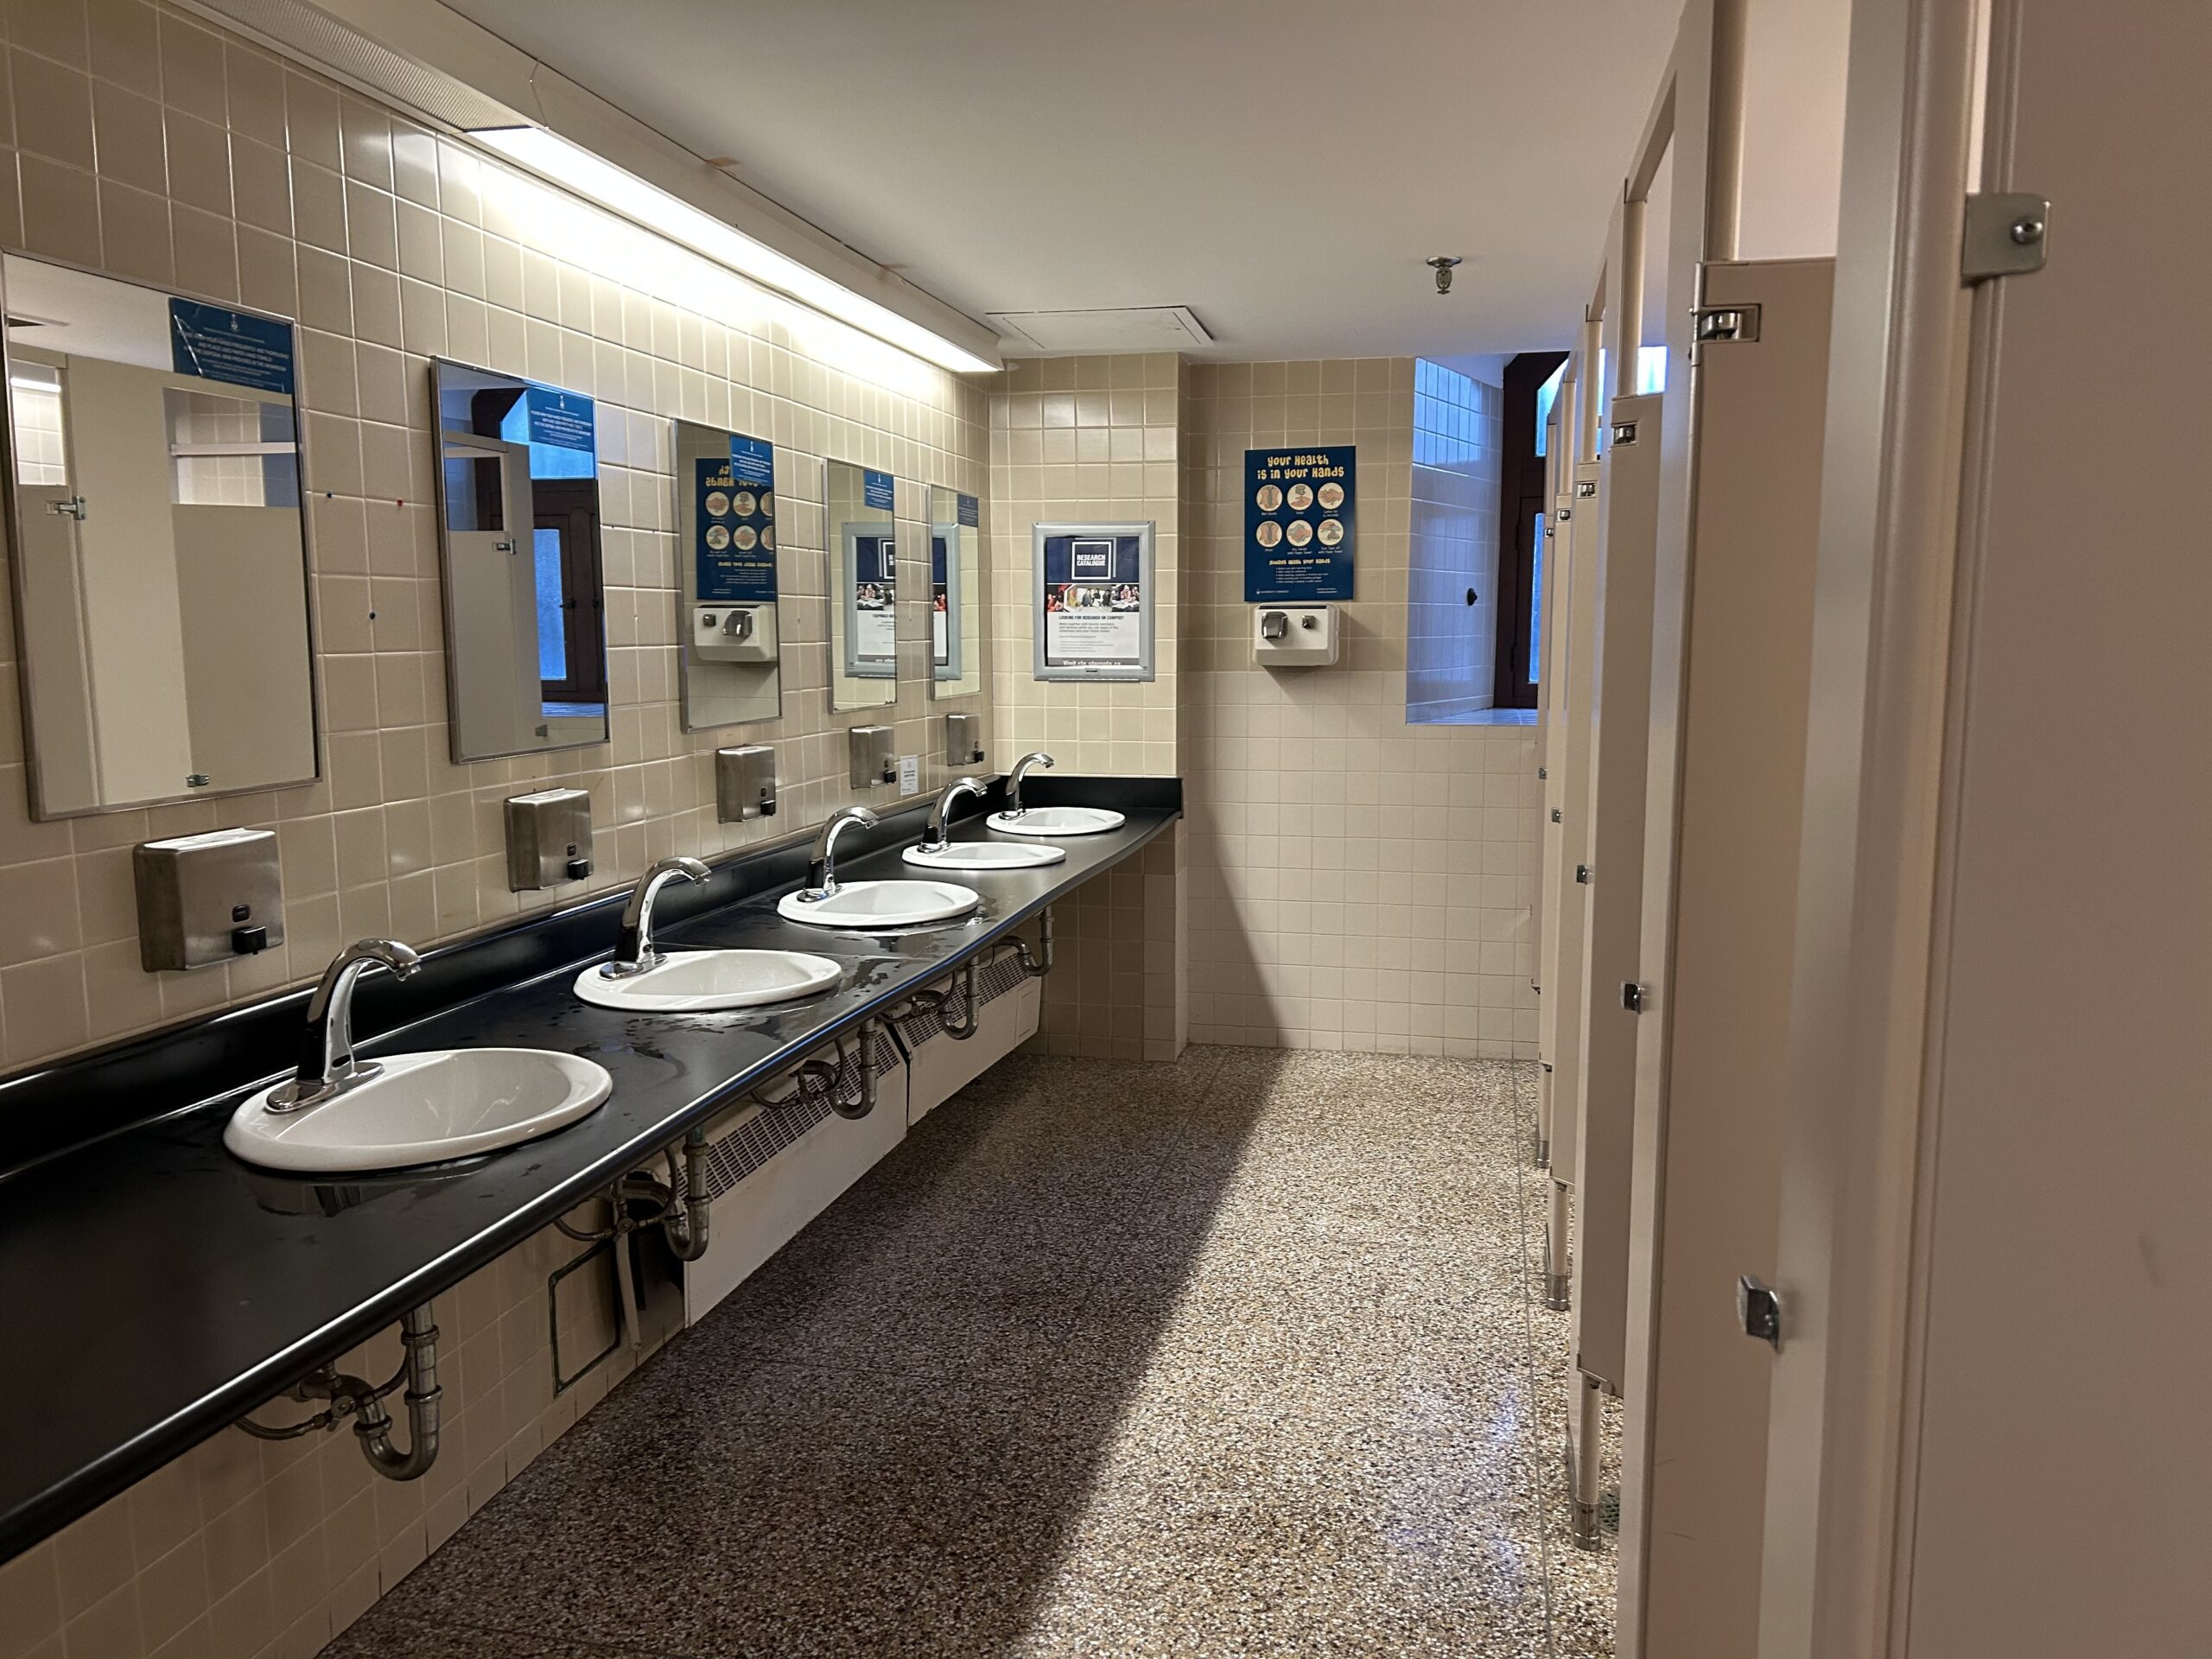 U of T Washrooms Review